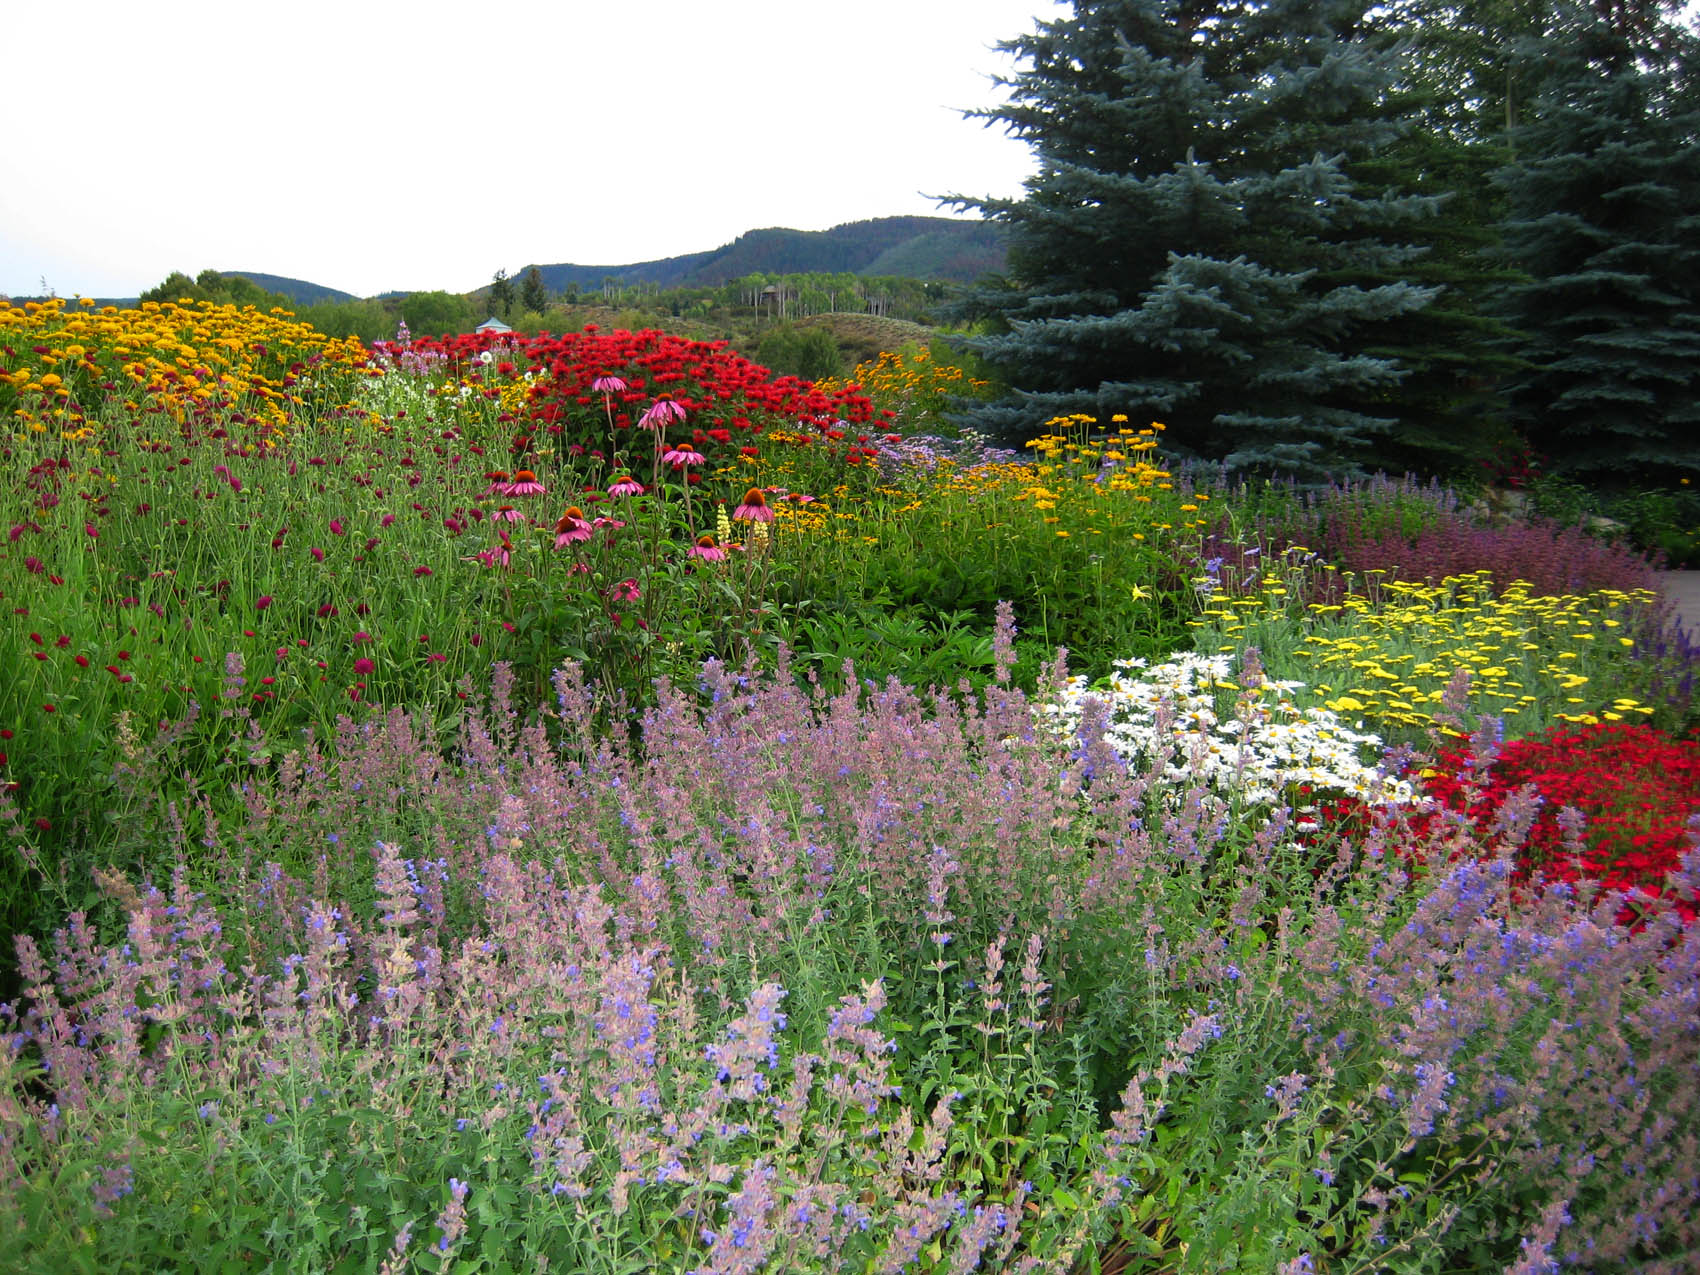 The image shows a vibrant and colorful flower garden with a variety of blooming plants and evergreen trees in the background under a cloudy sky.